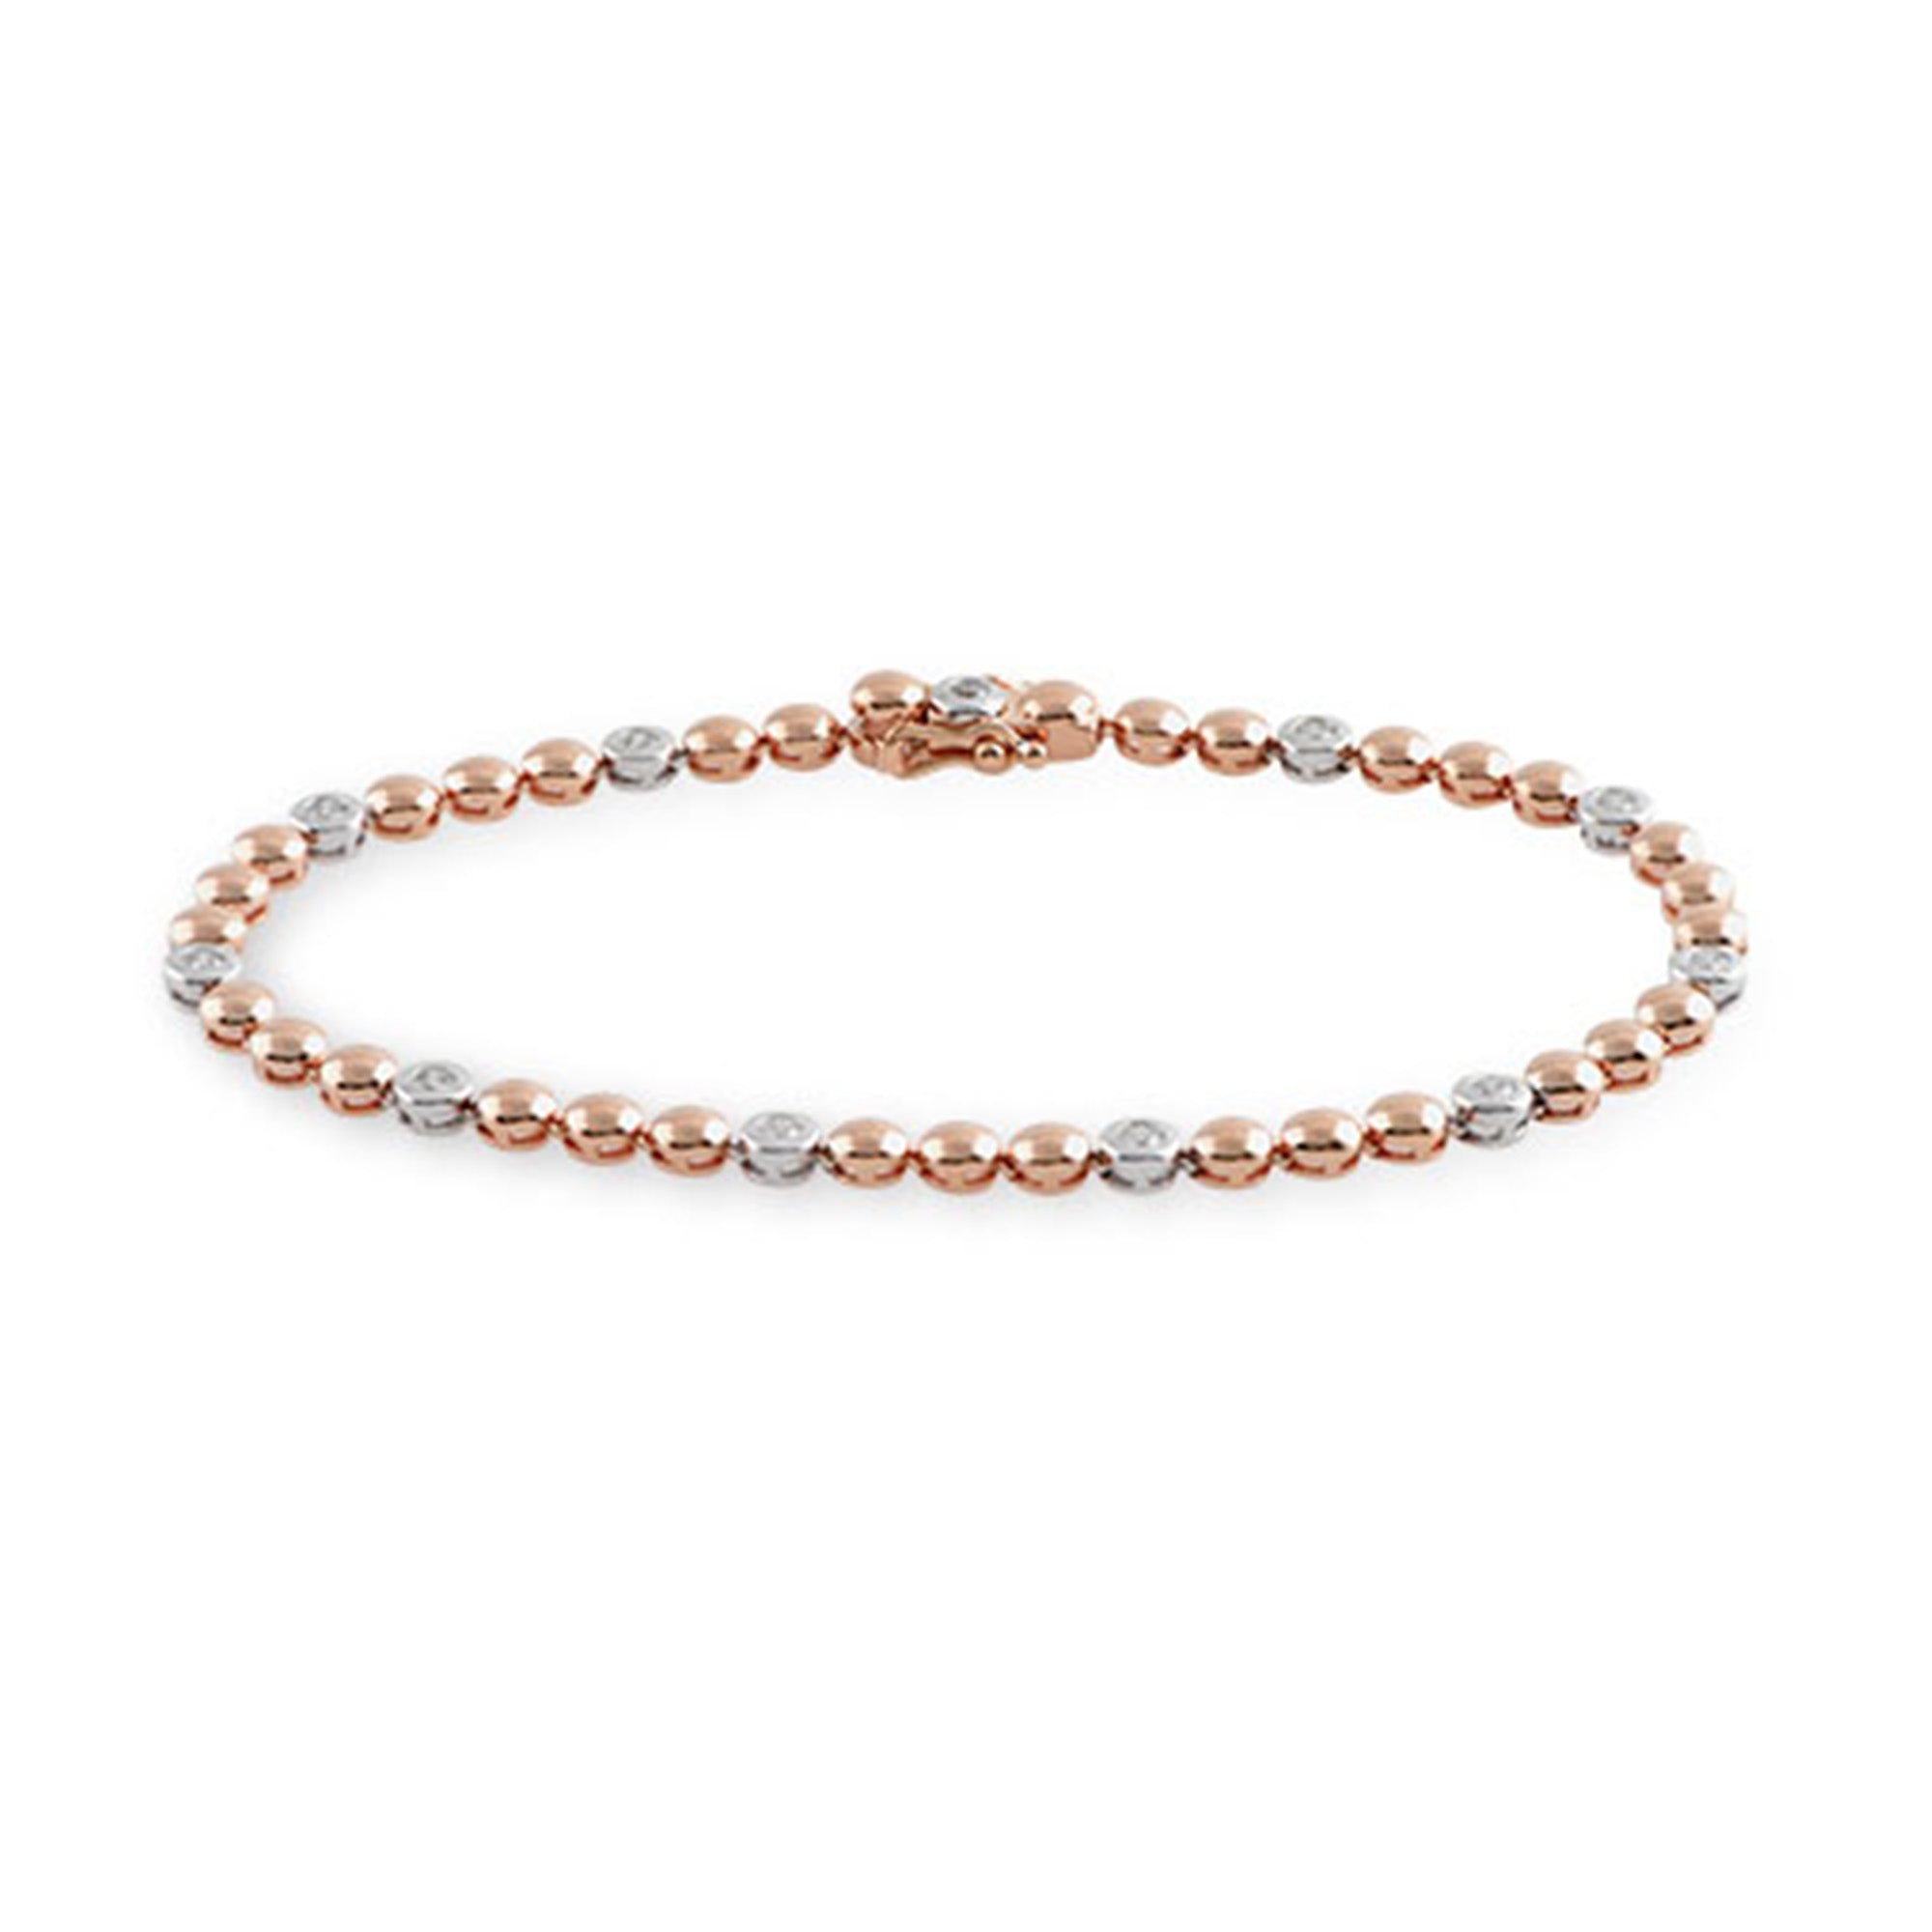 14K Rose Gold Ball Bracelet: A Timeless Classic - Grimal Jewelry